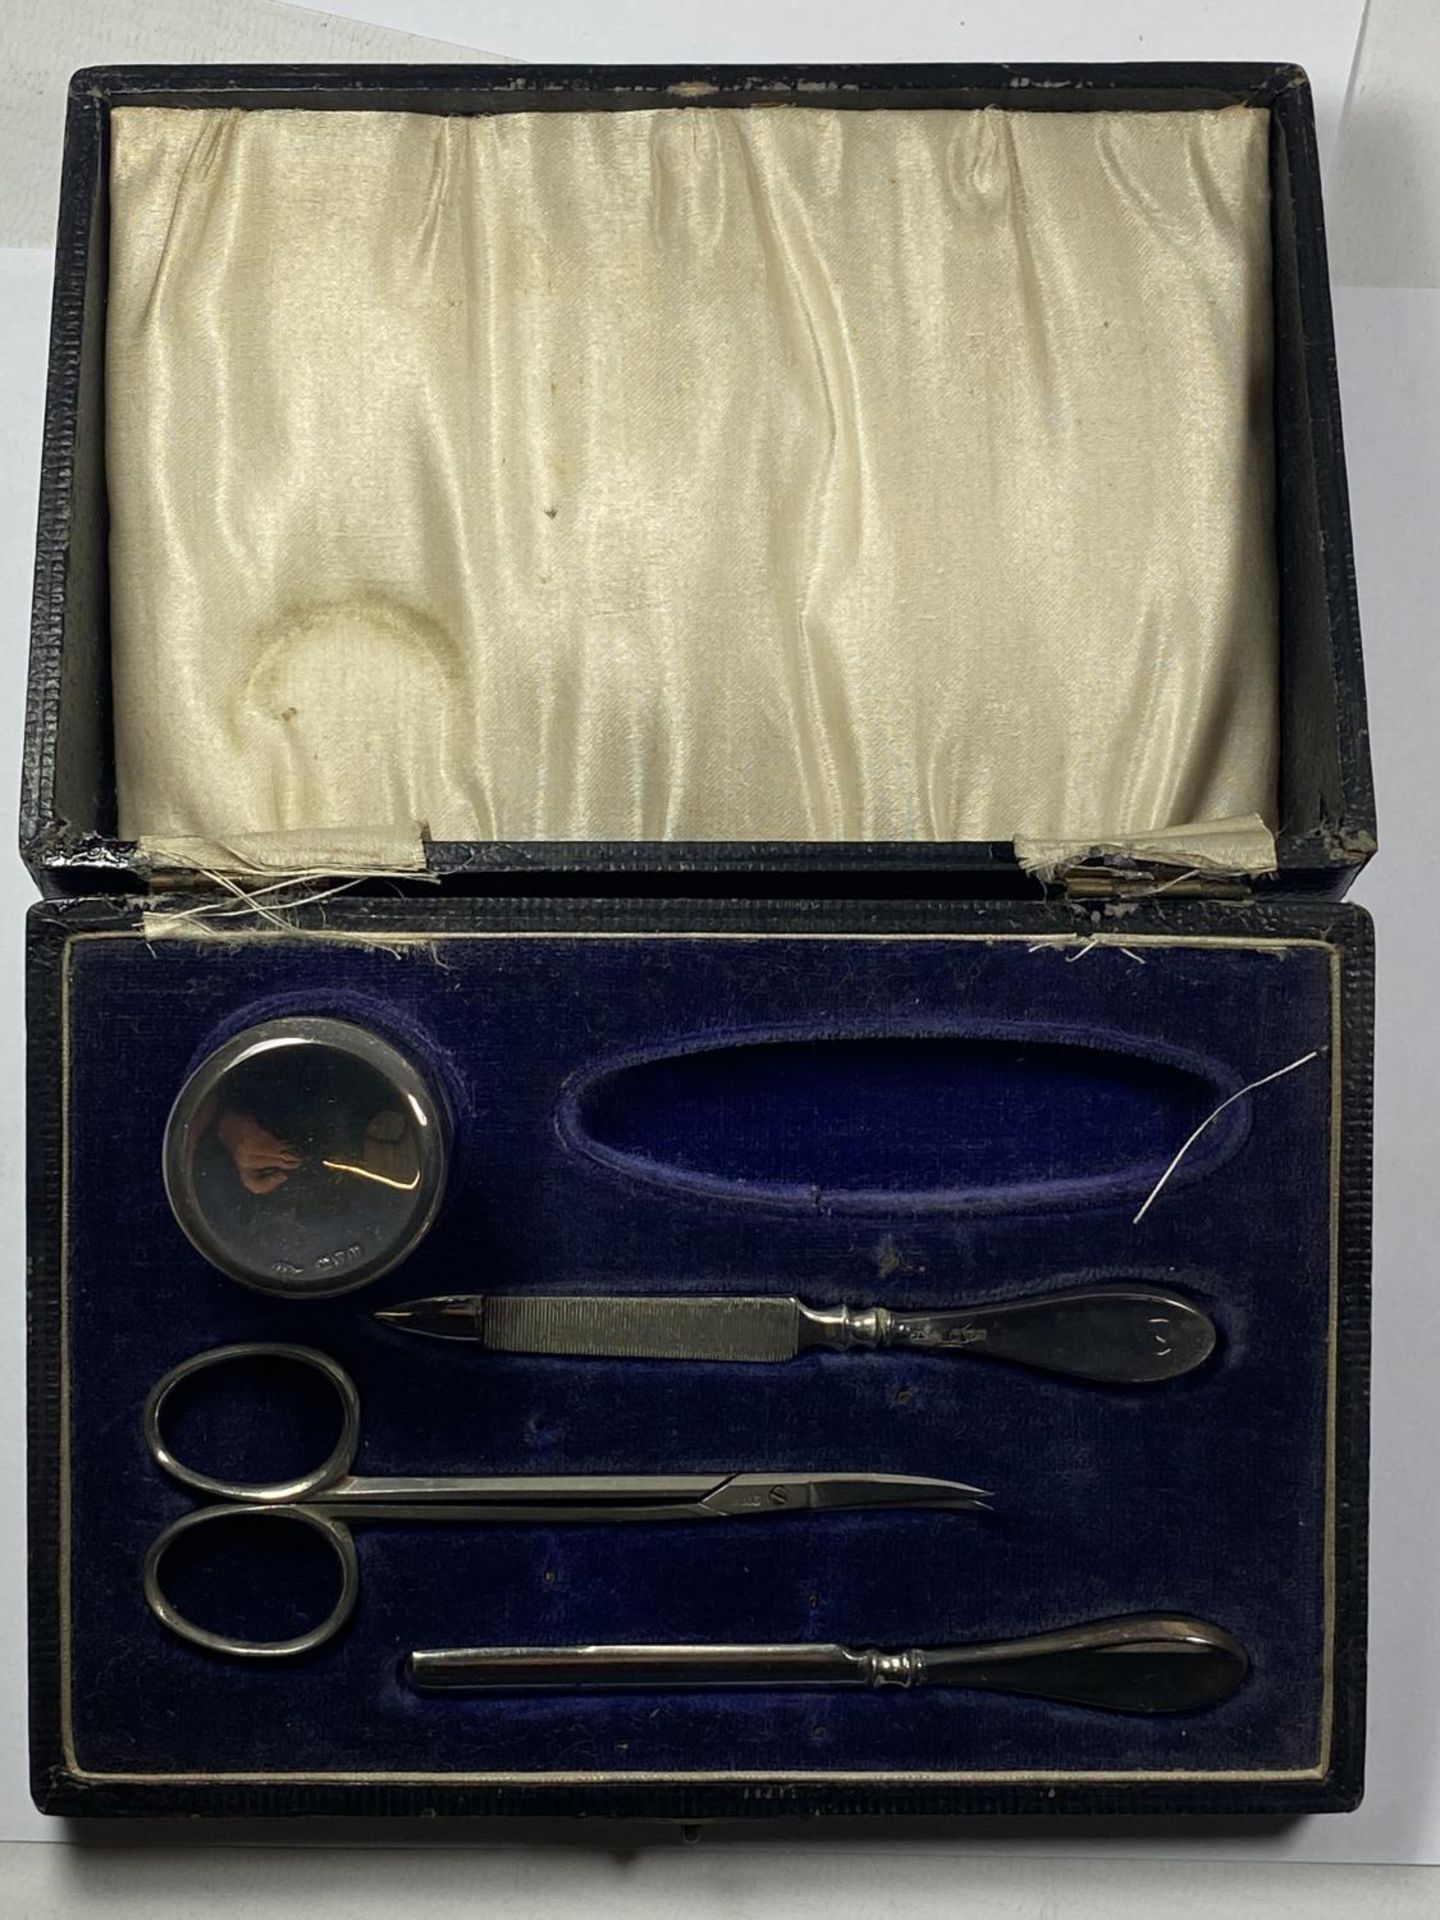 A CASED CHESTER HALLMARKED SILVER MANICURE SET (MISSING ONE ITEM) - Image 2 of 6